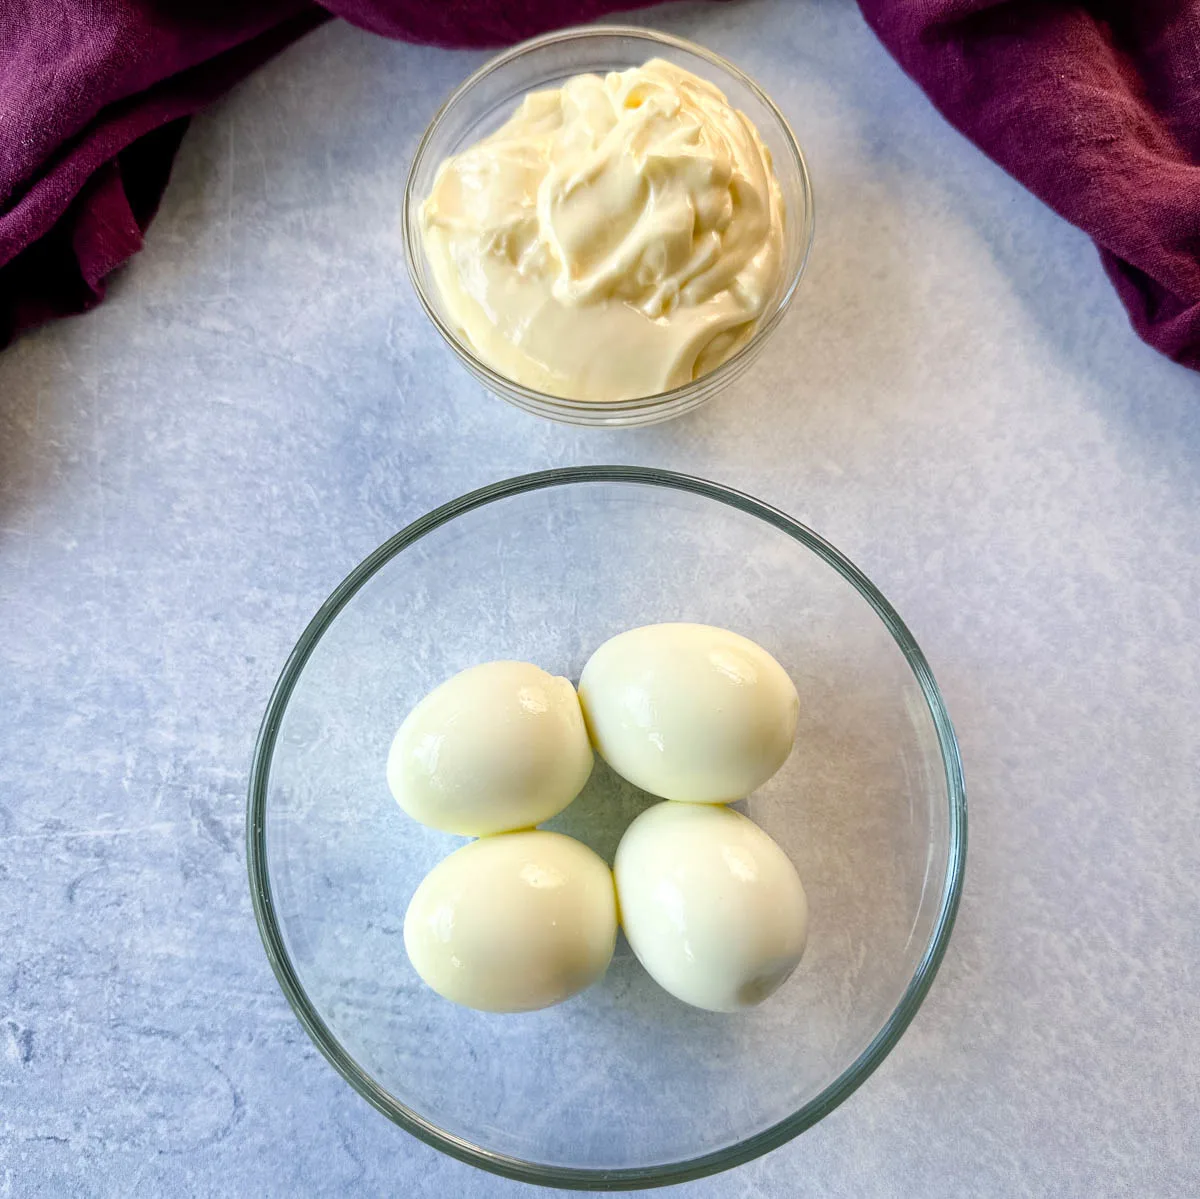 mayo and peeled hard boiled eggs in separate glass bowls